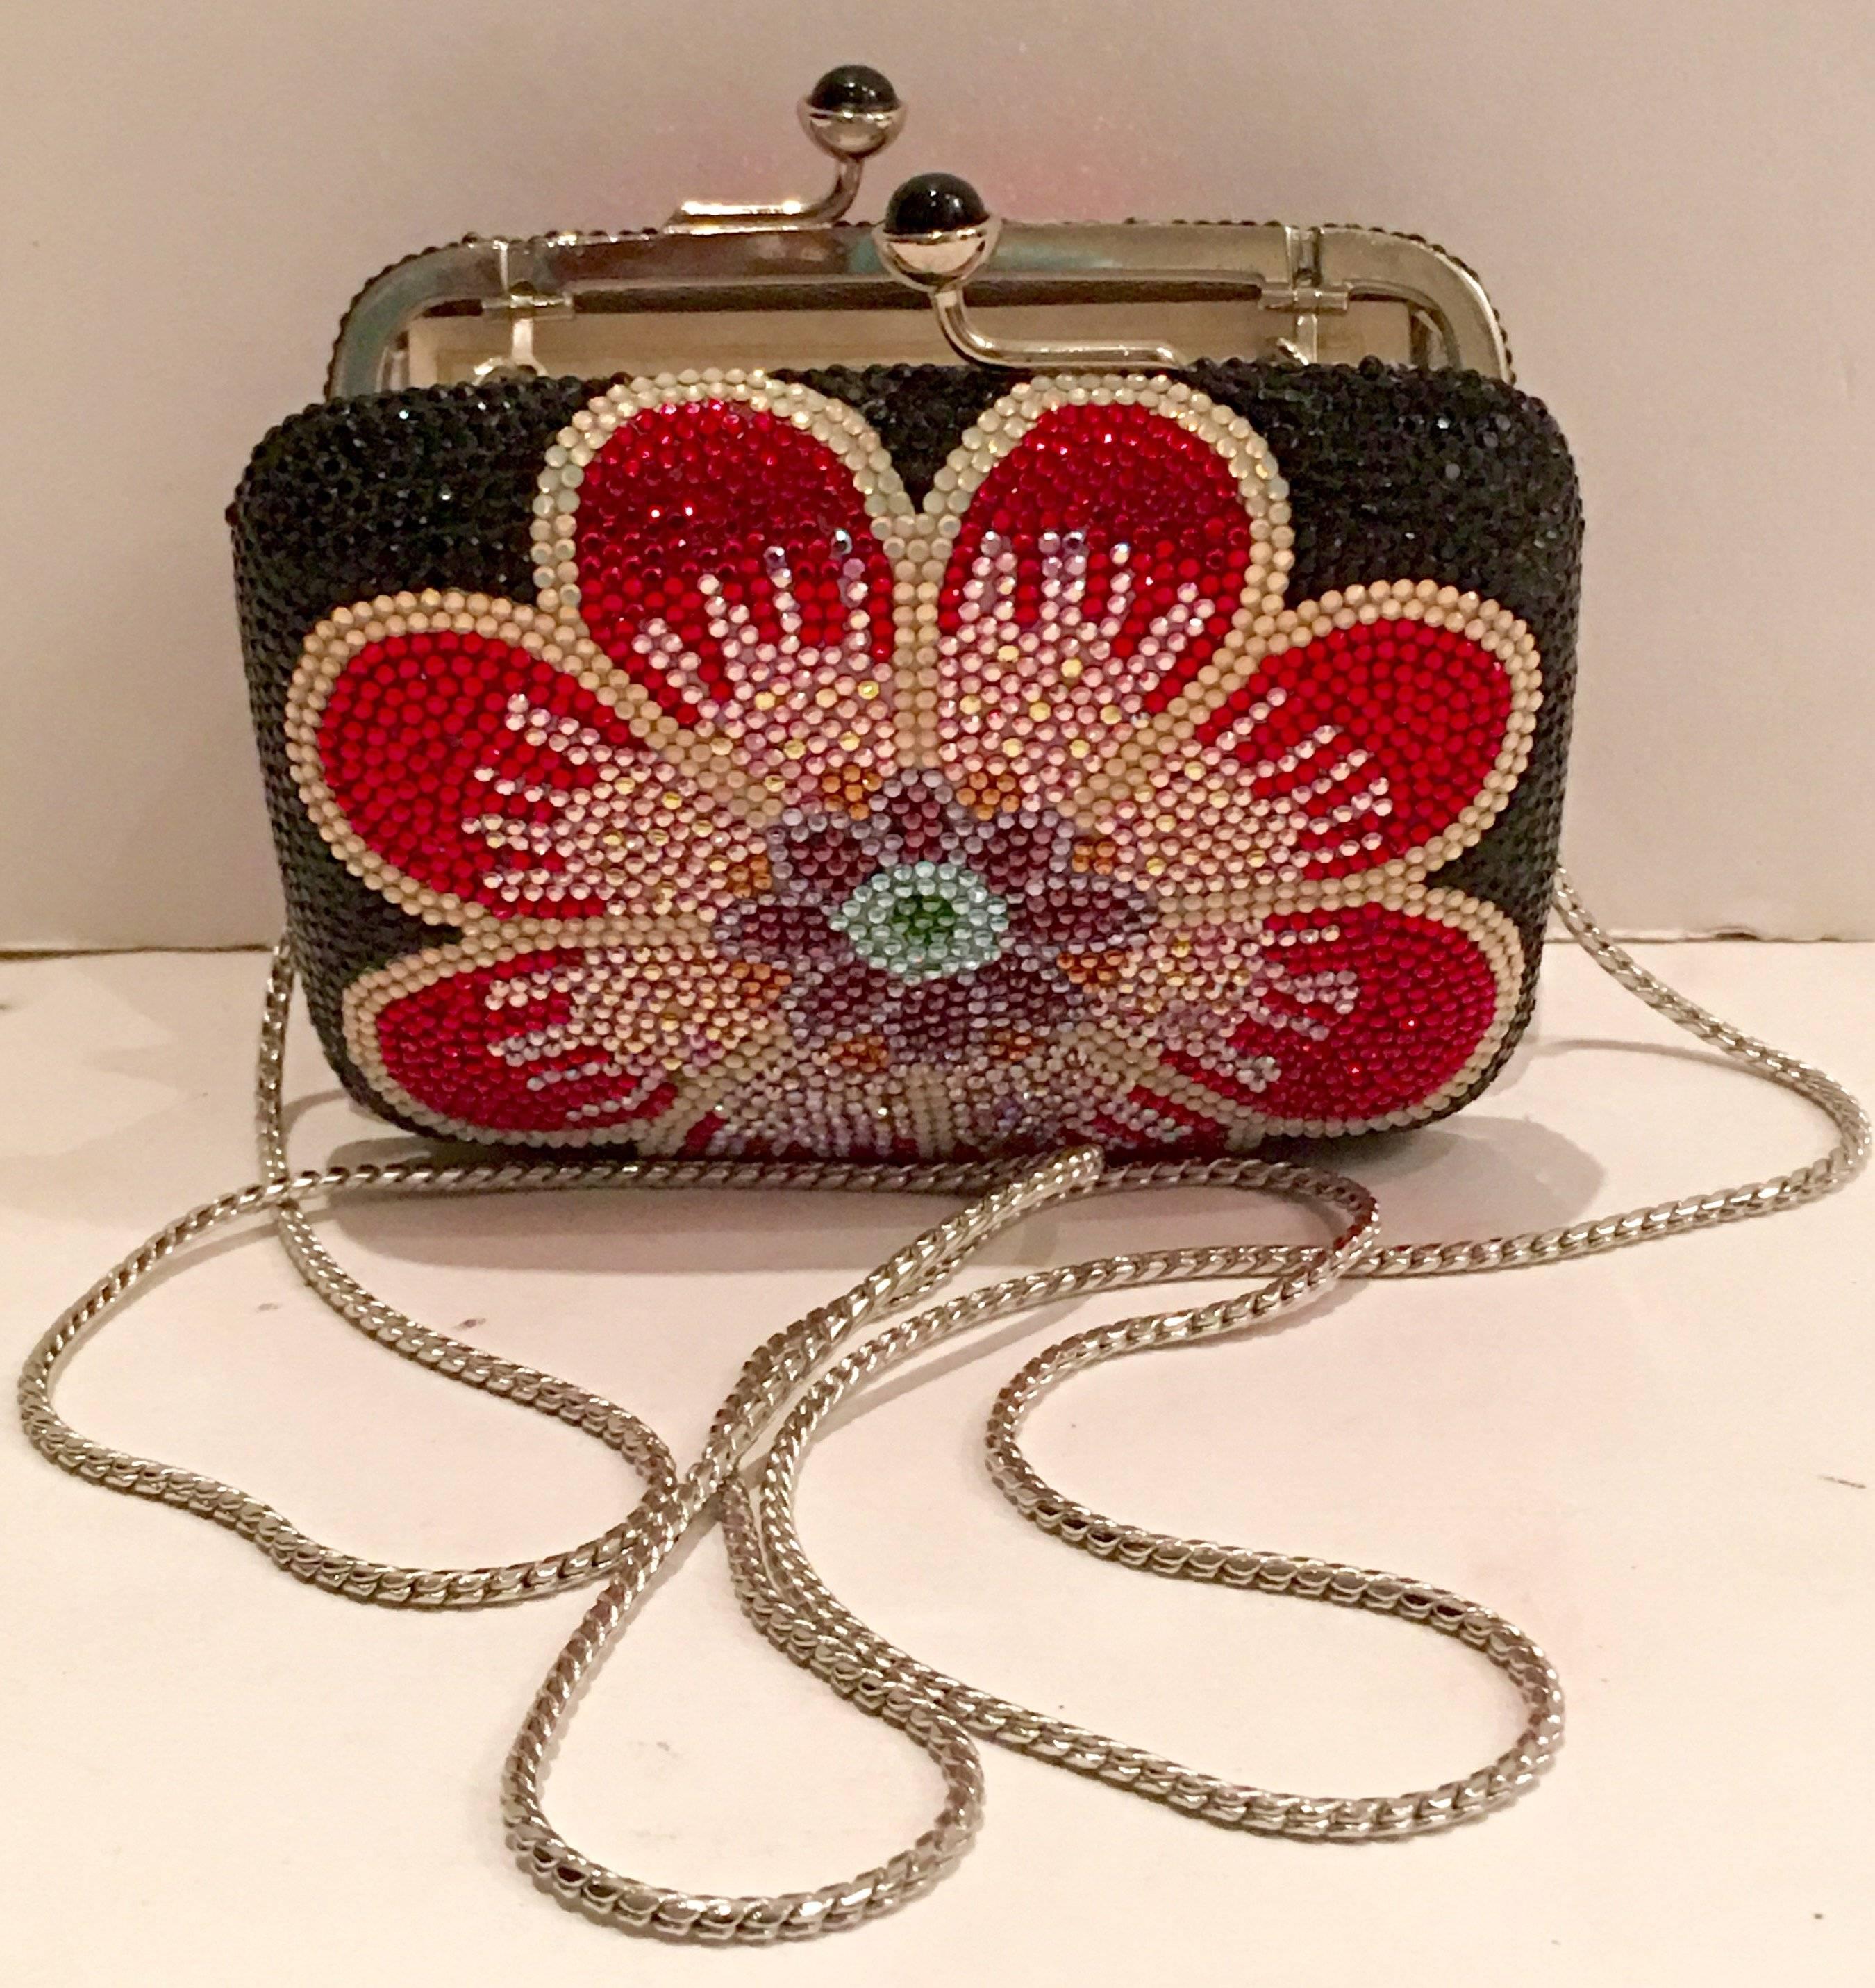 Rare Judith Leiber Swarofski crystal embellished flower Minaudiere evening bag. This special and rare flower motif collectors evening bag from famed artisan Judith Leiber features a large central flower in ruby red, pink, amethyst, orange, white and